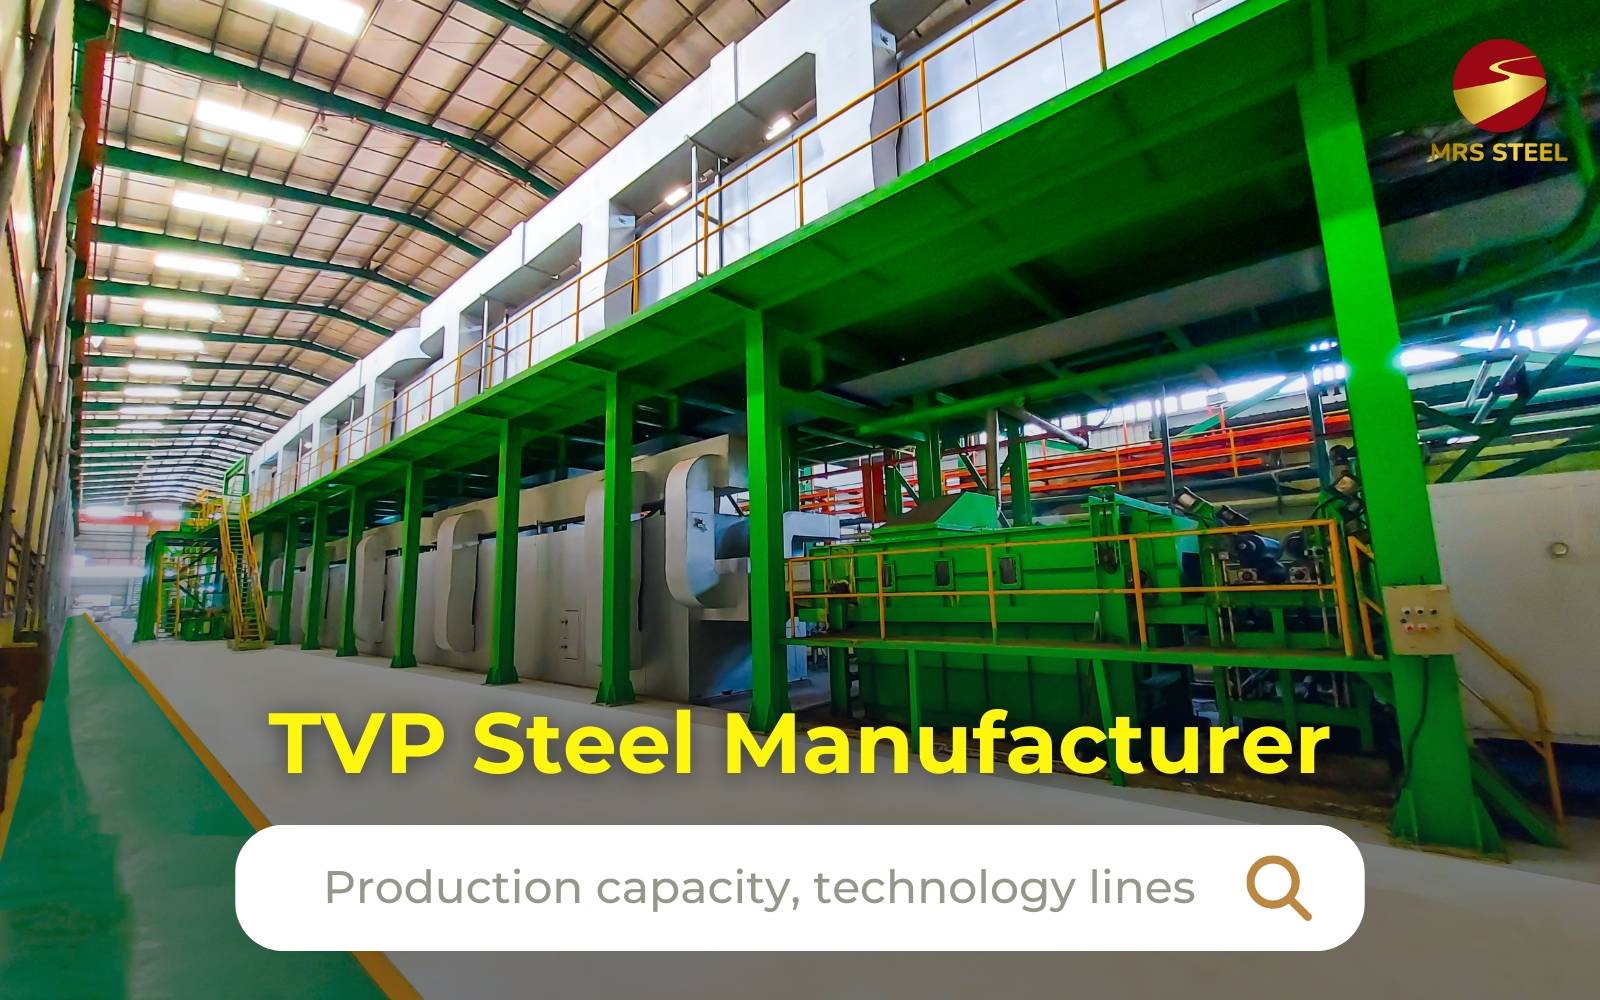 Learn about TVP steel manufacturer - The longstanding position in the Vietnam market